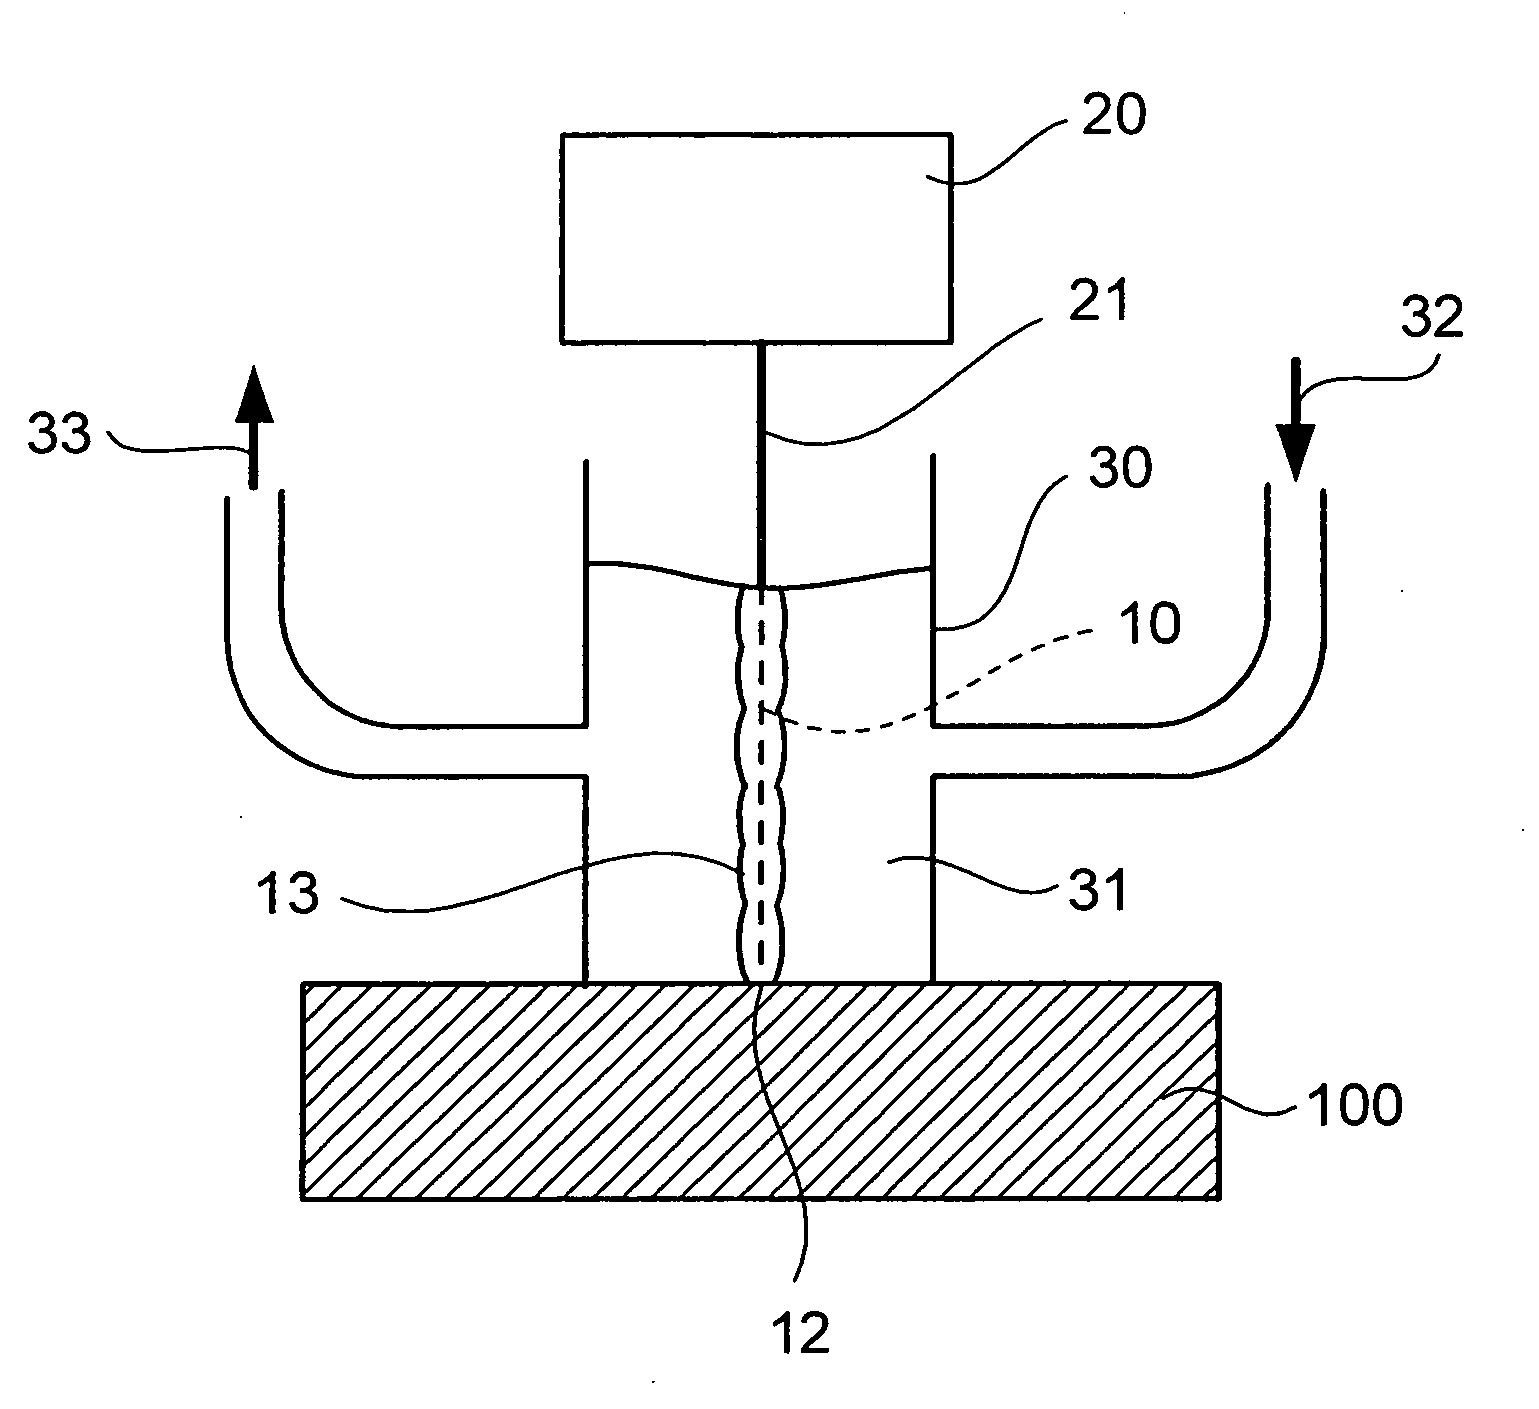 Method of processing rock with laser and apparatus for the same